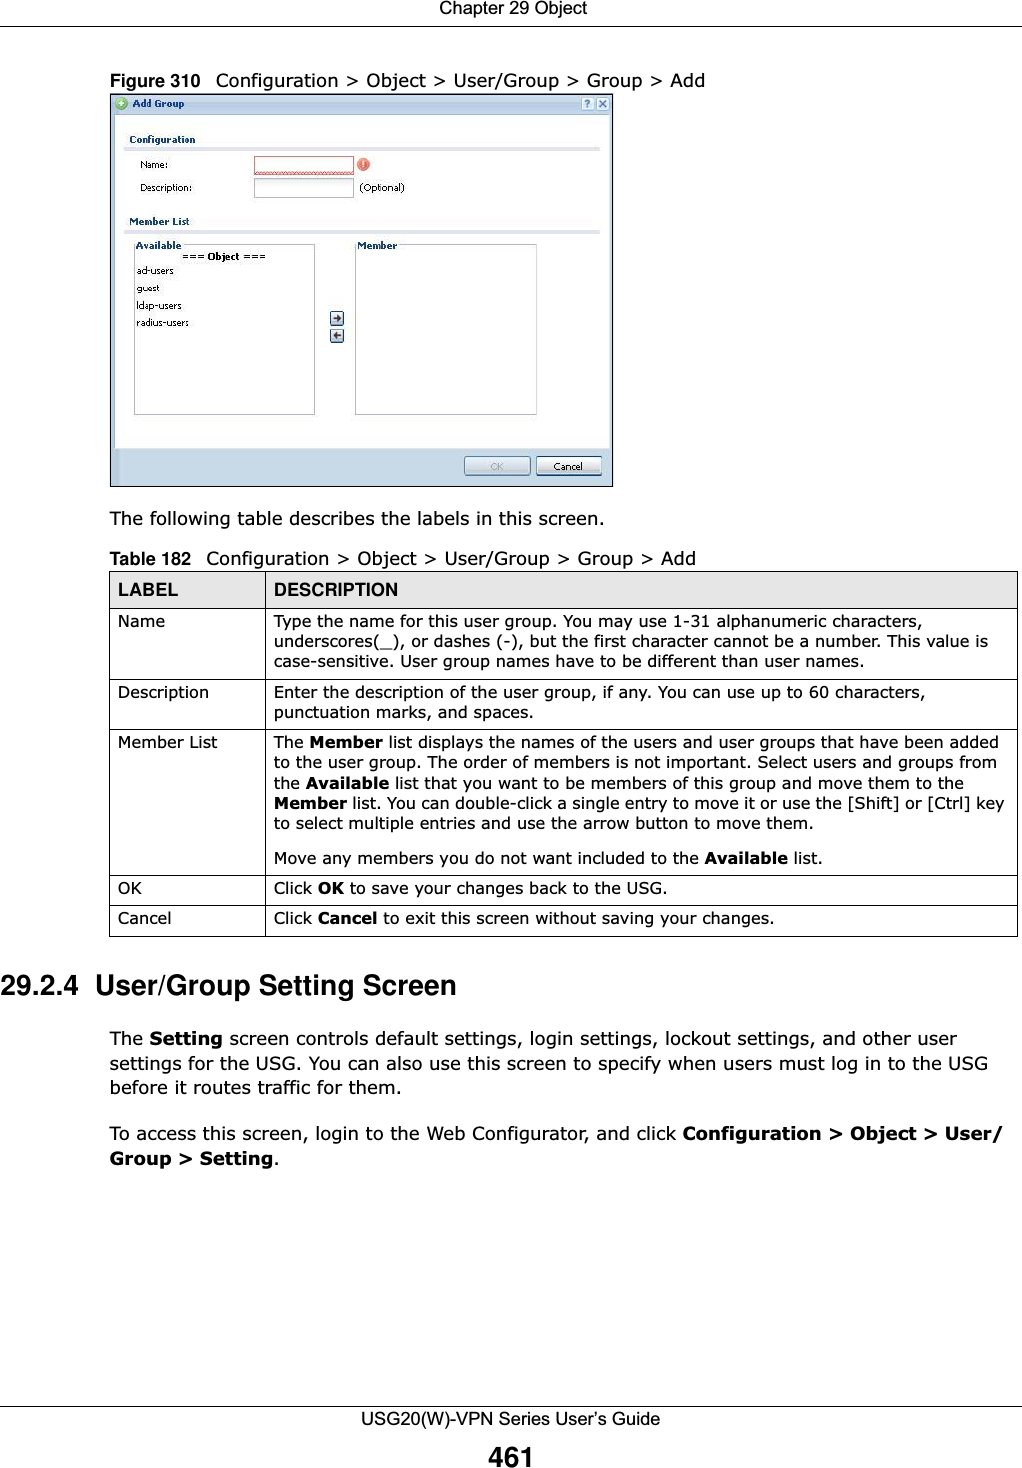  Chapter 29 ObjectUSG20(W)-VPN Series User’s Guide461Figure 310   Configuration &gt; Object &gt; User/Group &gt; Group &gt; AddThe following table describes the labels in this screen.  29.2.4  User/Group Setting Screen The Setting screen controls default settings, login settings, lockout settings, and other user settings for the USG. You can also use this screen to specify when users must log in to the USG before it routes traffic for them.To access this screen, login to the Web Configurator, and click Configuration &gt; Object &gt; User/Group &gt; Setting.Table 182   Configuration &gt; Object &gt; User/Group &gt; Group &gt; AddLABEL DESCRIPTIONName Type the name for this user group. You may use 1-31 alphanumeric characters, underscores(_), or dashes (-), but the first character cannot be a number. This value is case-sensitive. User group names have to be different than user names.Description Enter the description of the user group, if any. You can use up to 60 characters, punctuation marks, and spaces.Member List The Member list displays the names of the users and user groups that have been added to the user group. The order of members is not important. Select users and groups from the Available list that you want to be members of this group and move them to the Member list. You can double-click a single entry to move it or use the [Shift] or [Ctrl] key to select multiple entries and use the arrow button to move them. Move any members you do not want included to the Available list. OK Click OK to save your changes back to the USG.Cancel Click Cancel to exit this screen without saving your changes.